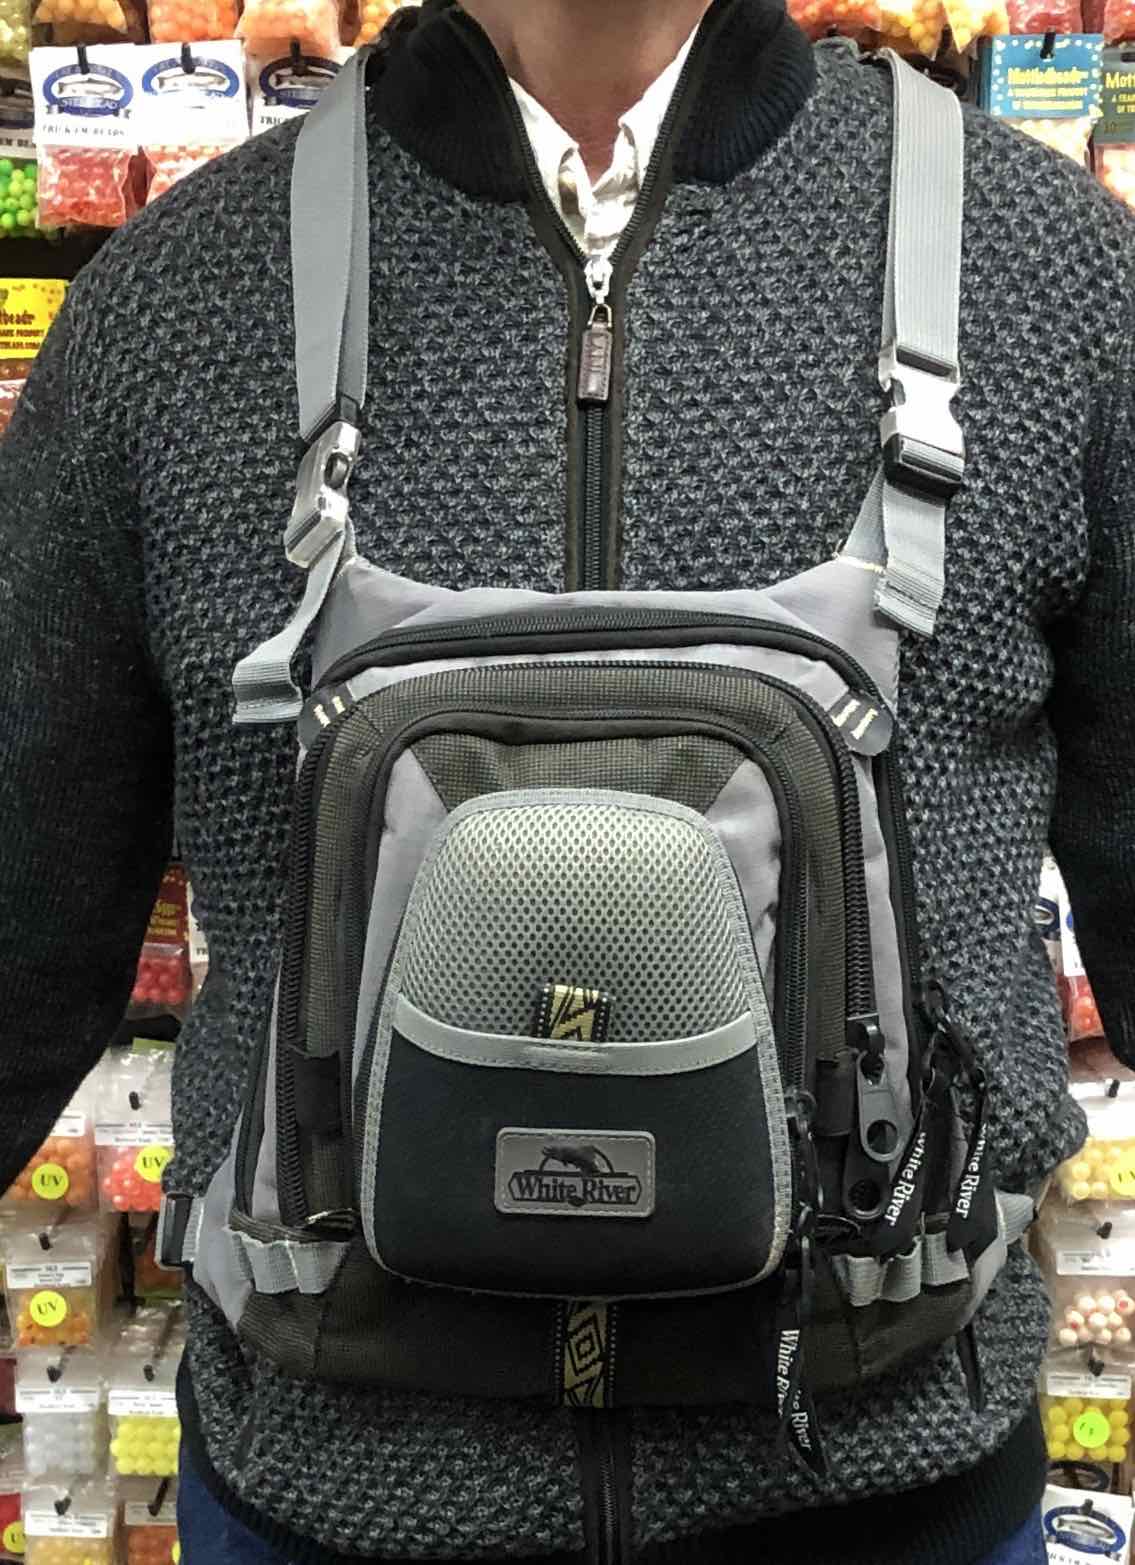 White River Chest Pack - GREAT SHAPE! - $35